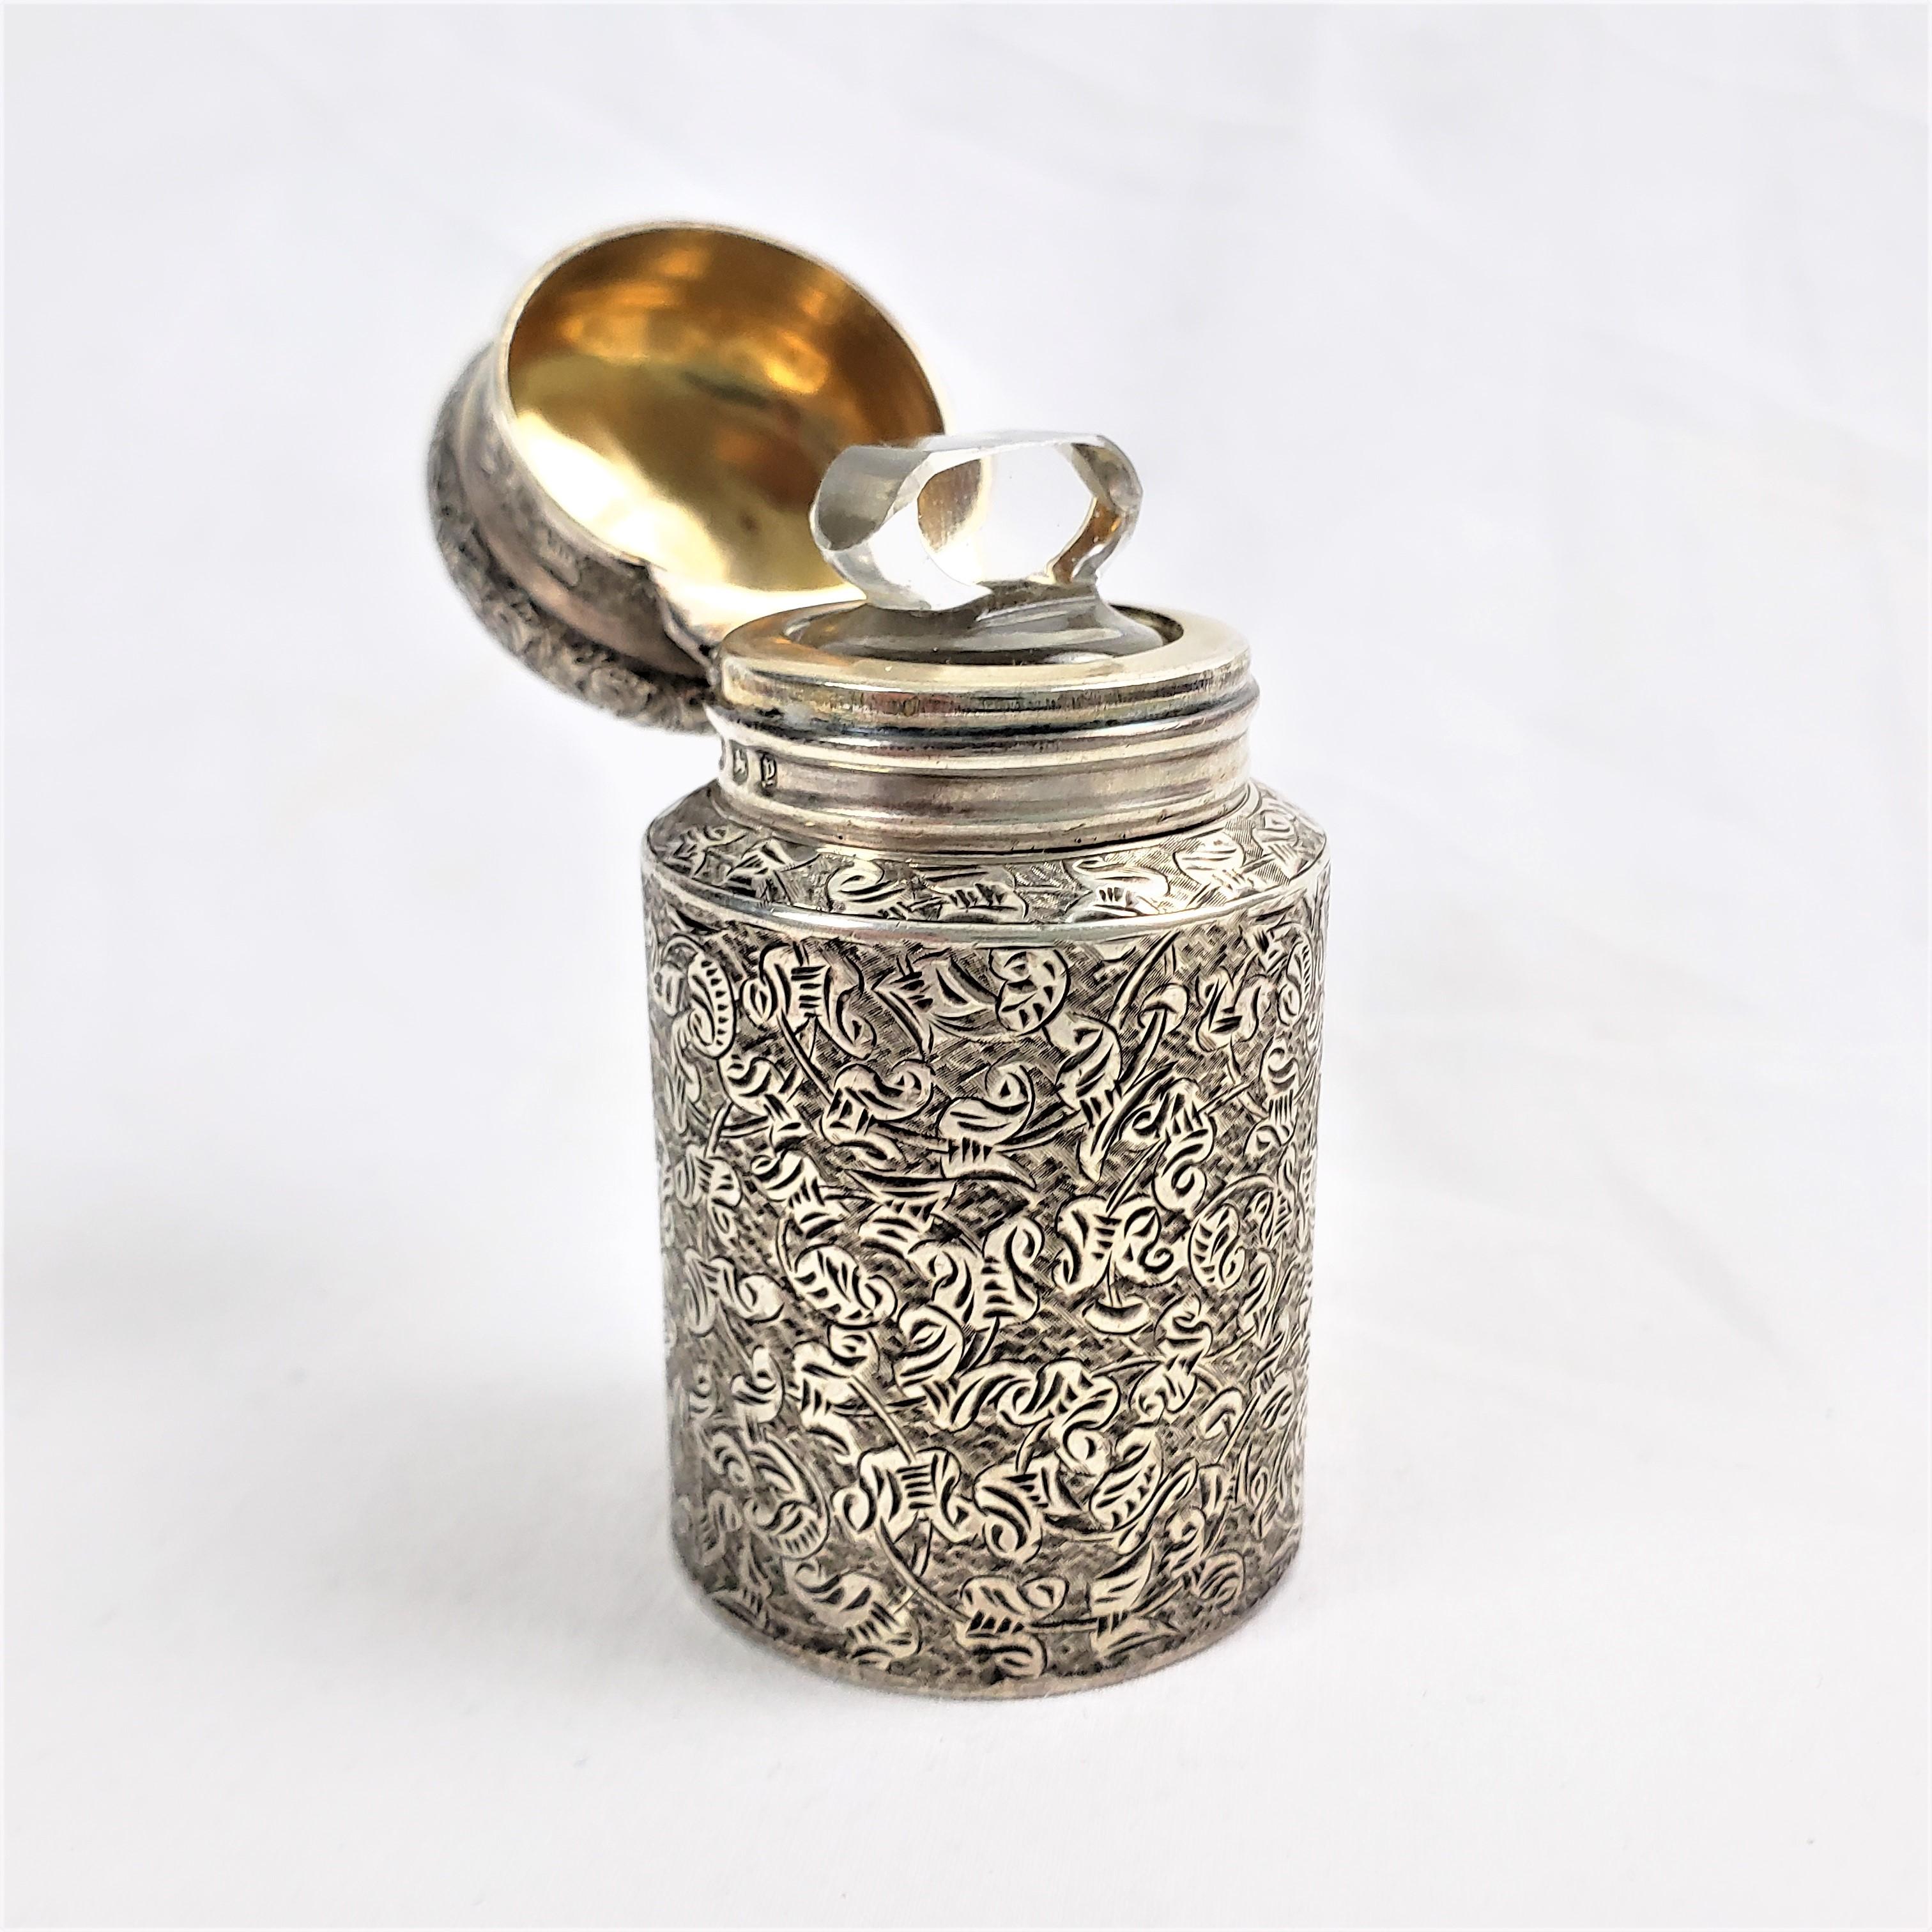 Hand-Crafted Antique Sterling Silver Scent or Perfume Bottle with Chased Decoration For Sale